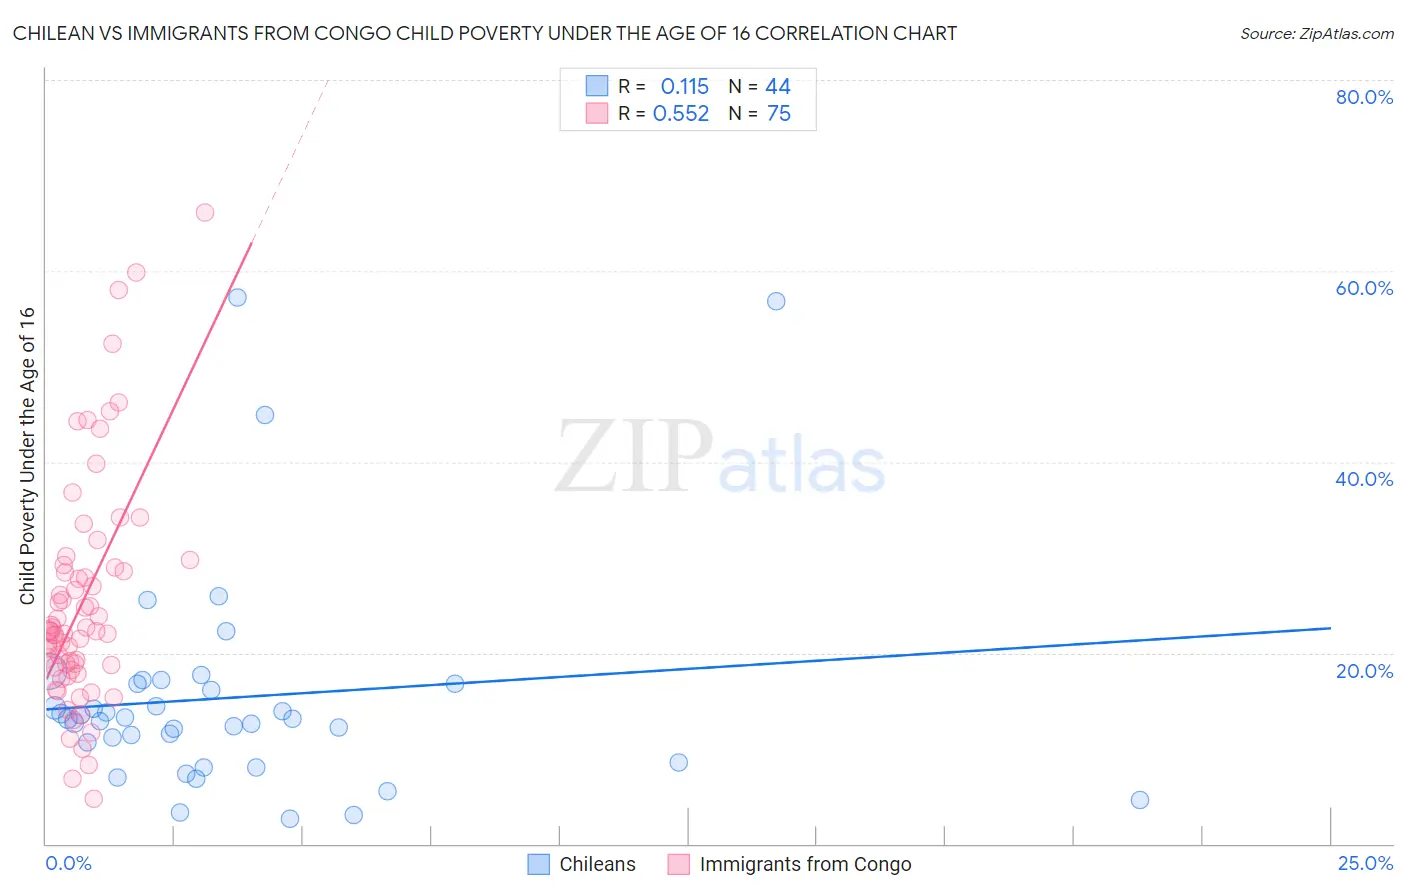 Chilean vs Immigrants from Congo Child Poverty Under the Age of 16